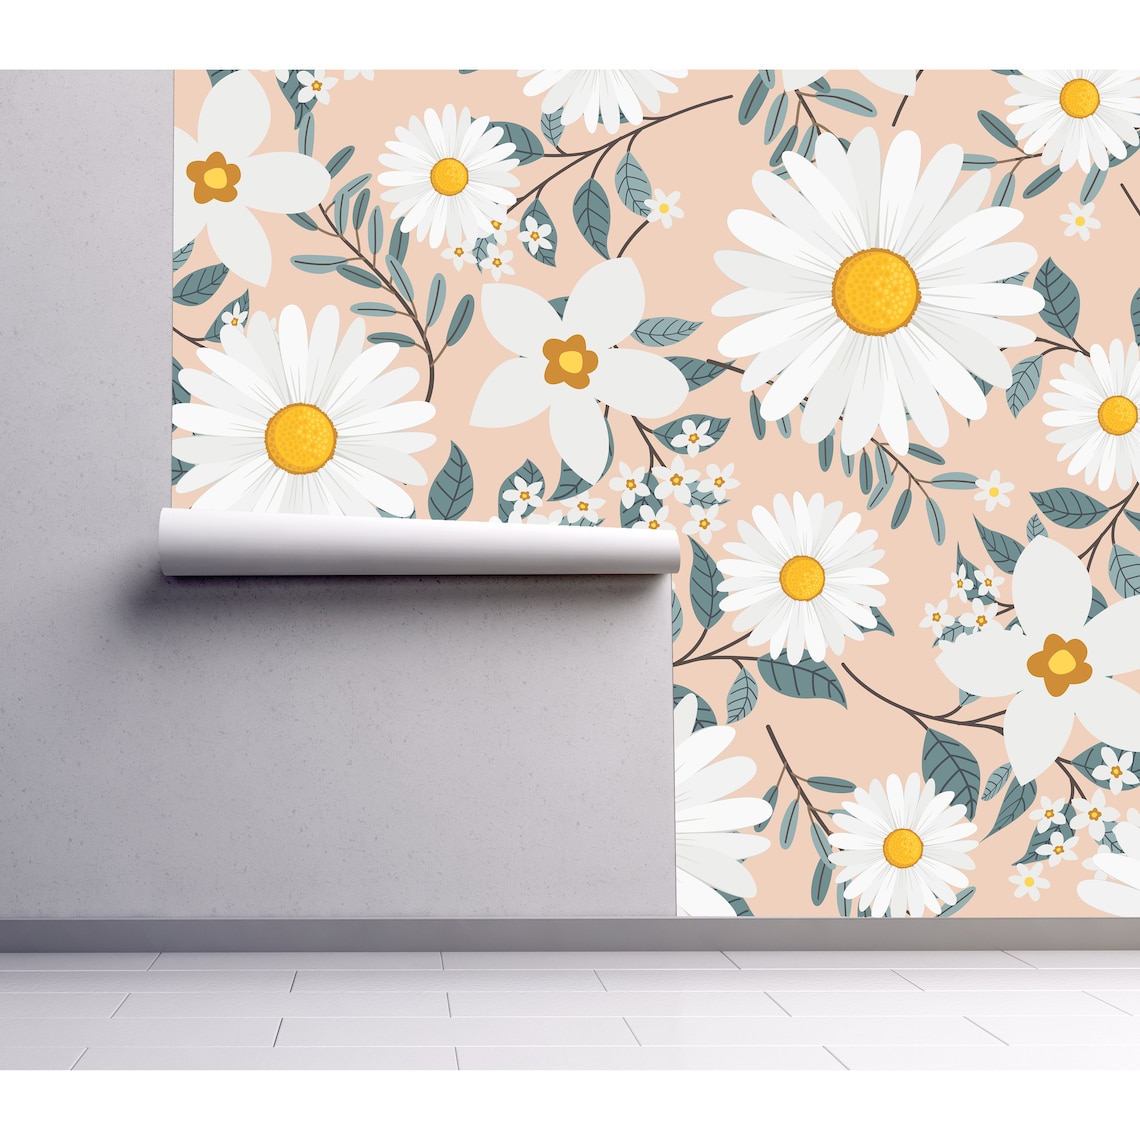 Daisy Wallpaper Peel and Stick Wallpaper Removable Wall - Etsy